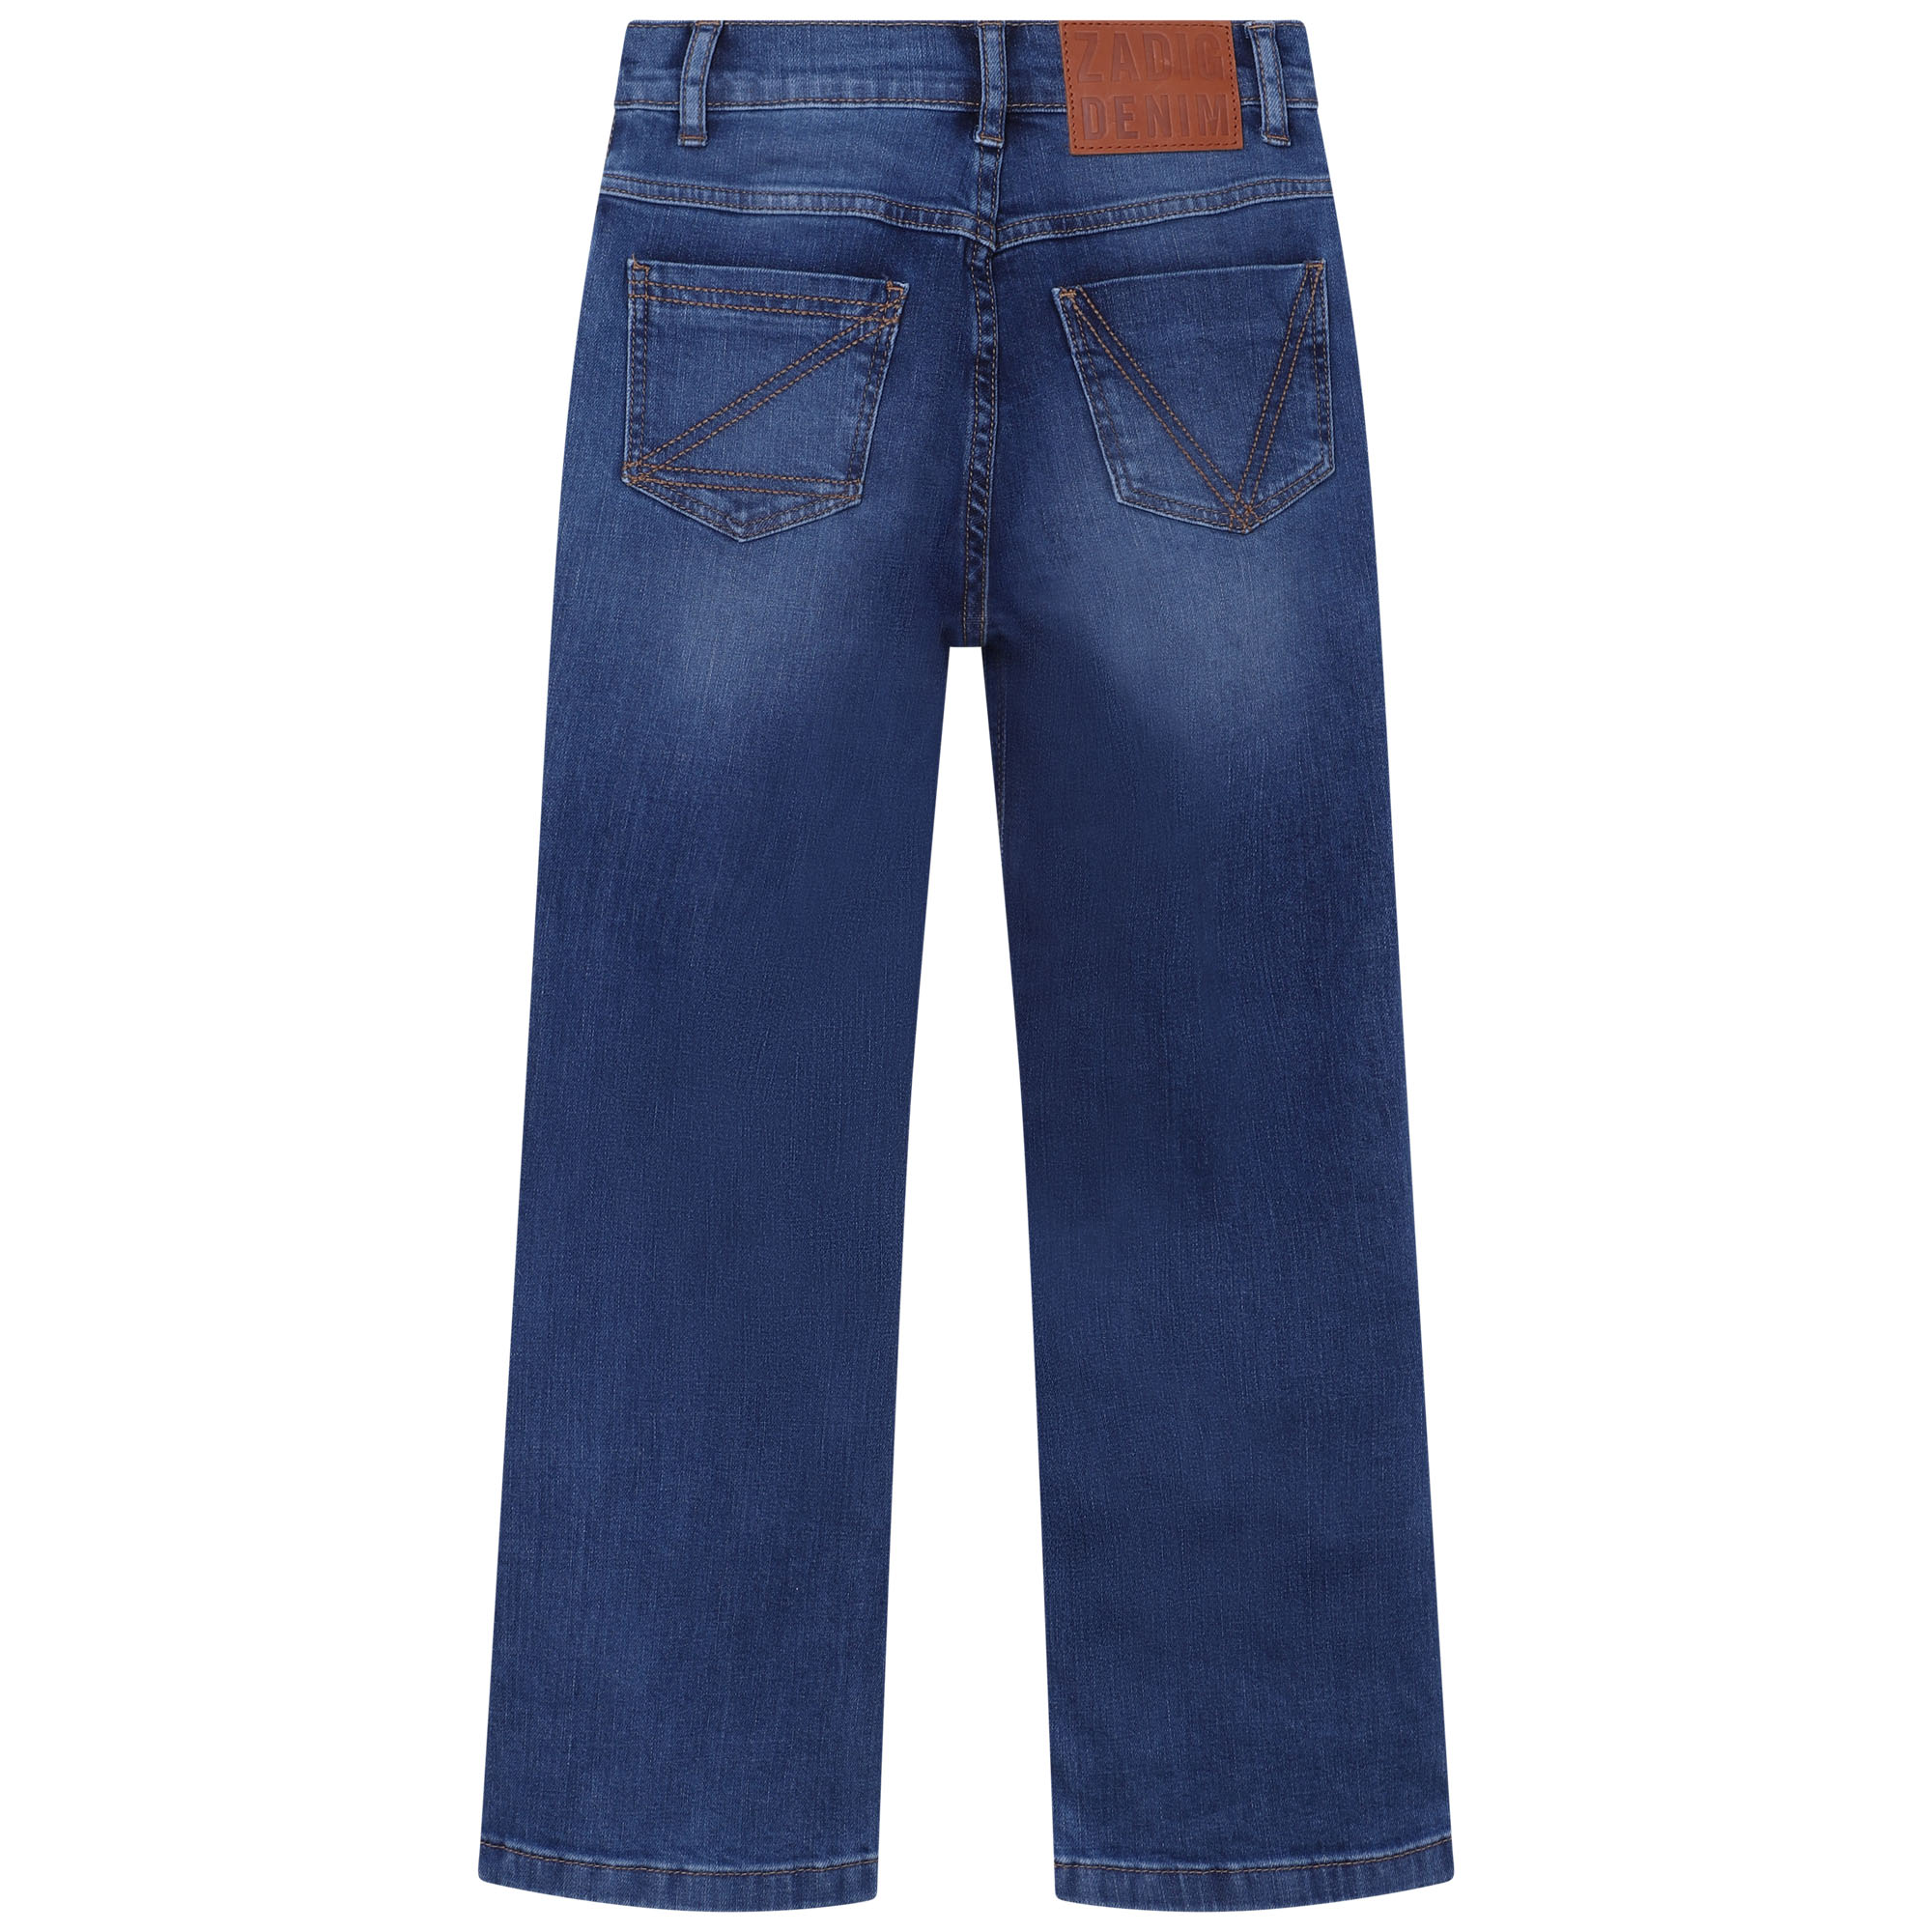 Cotton denim stretch jeans ZADIG & VOLTAIRE for GIRL